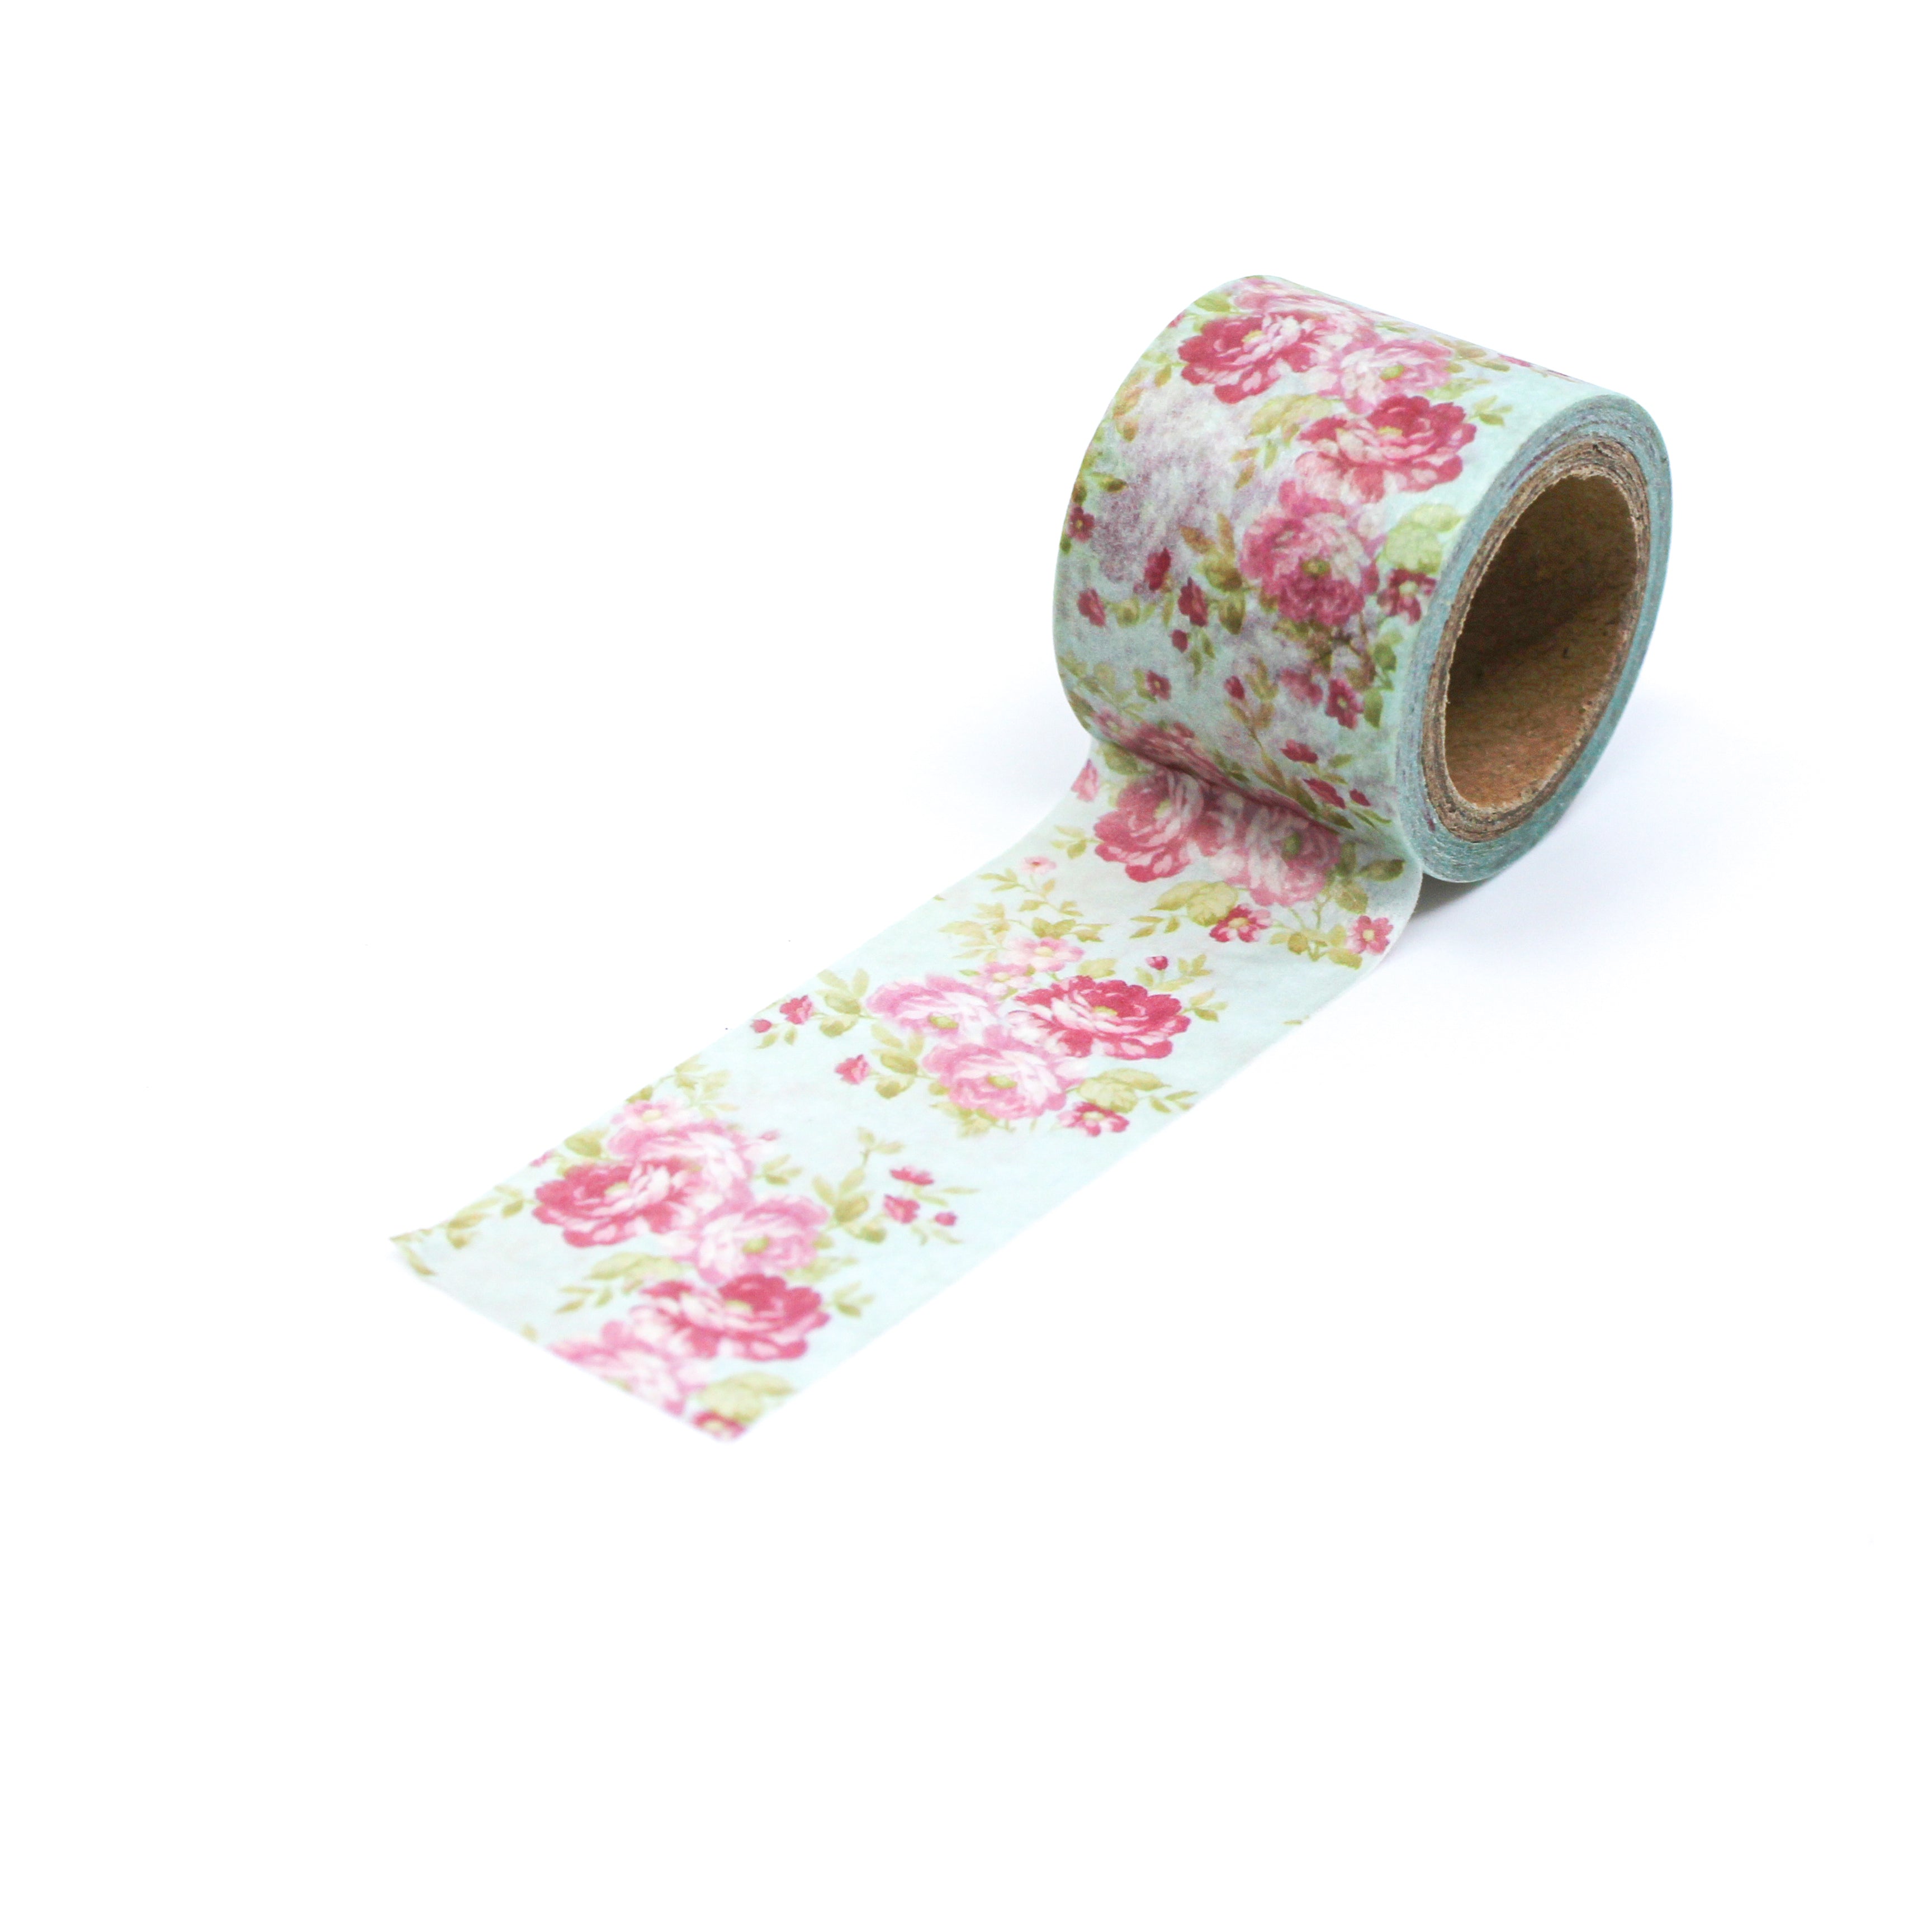 This is a full pattern repeat view  vintage blue and pink flowers washi tape BBB Supplies Craft Shop